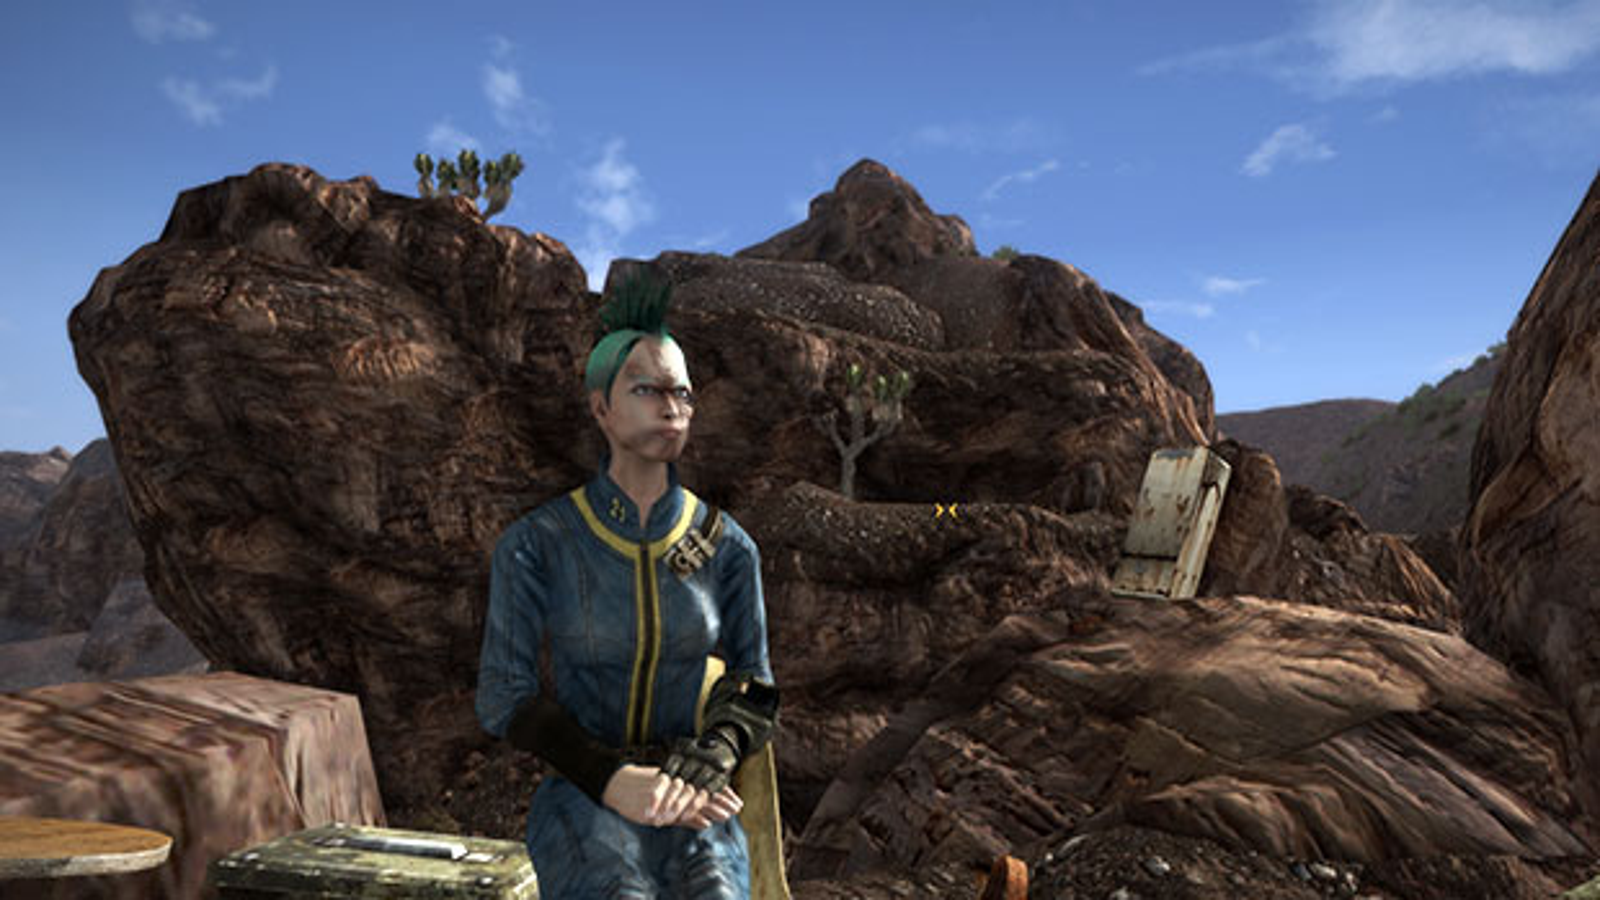 Fallout New Vegas Cut Content Restored In New Mod